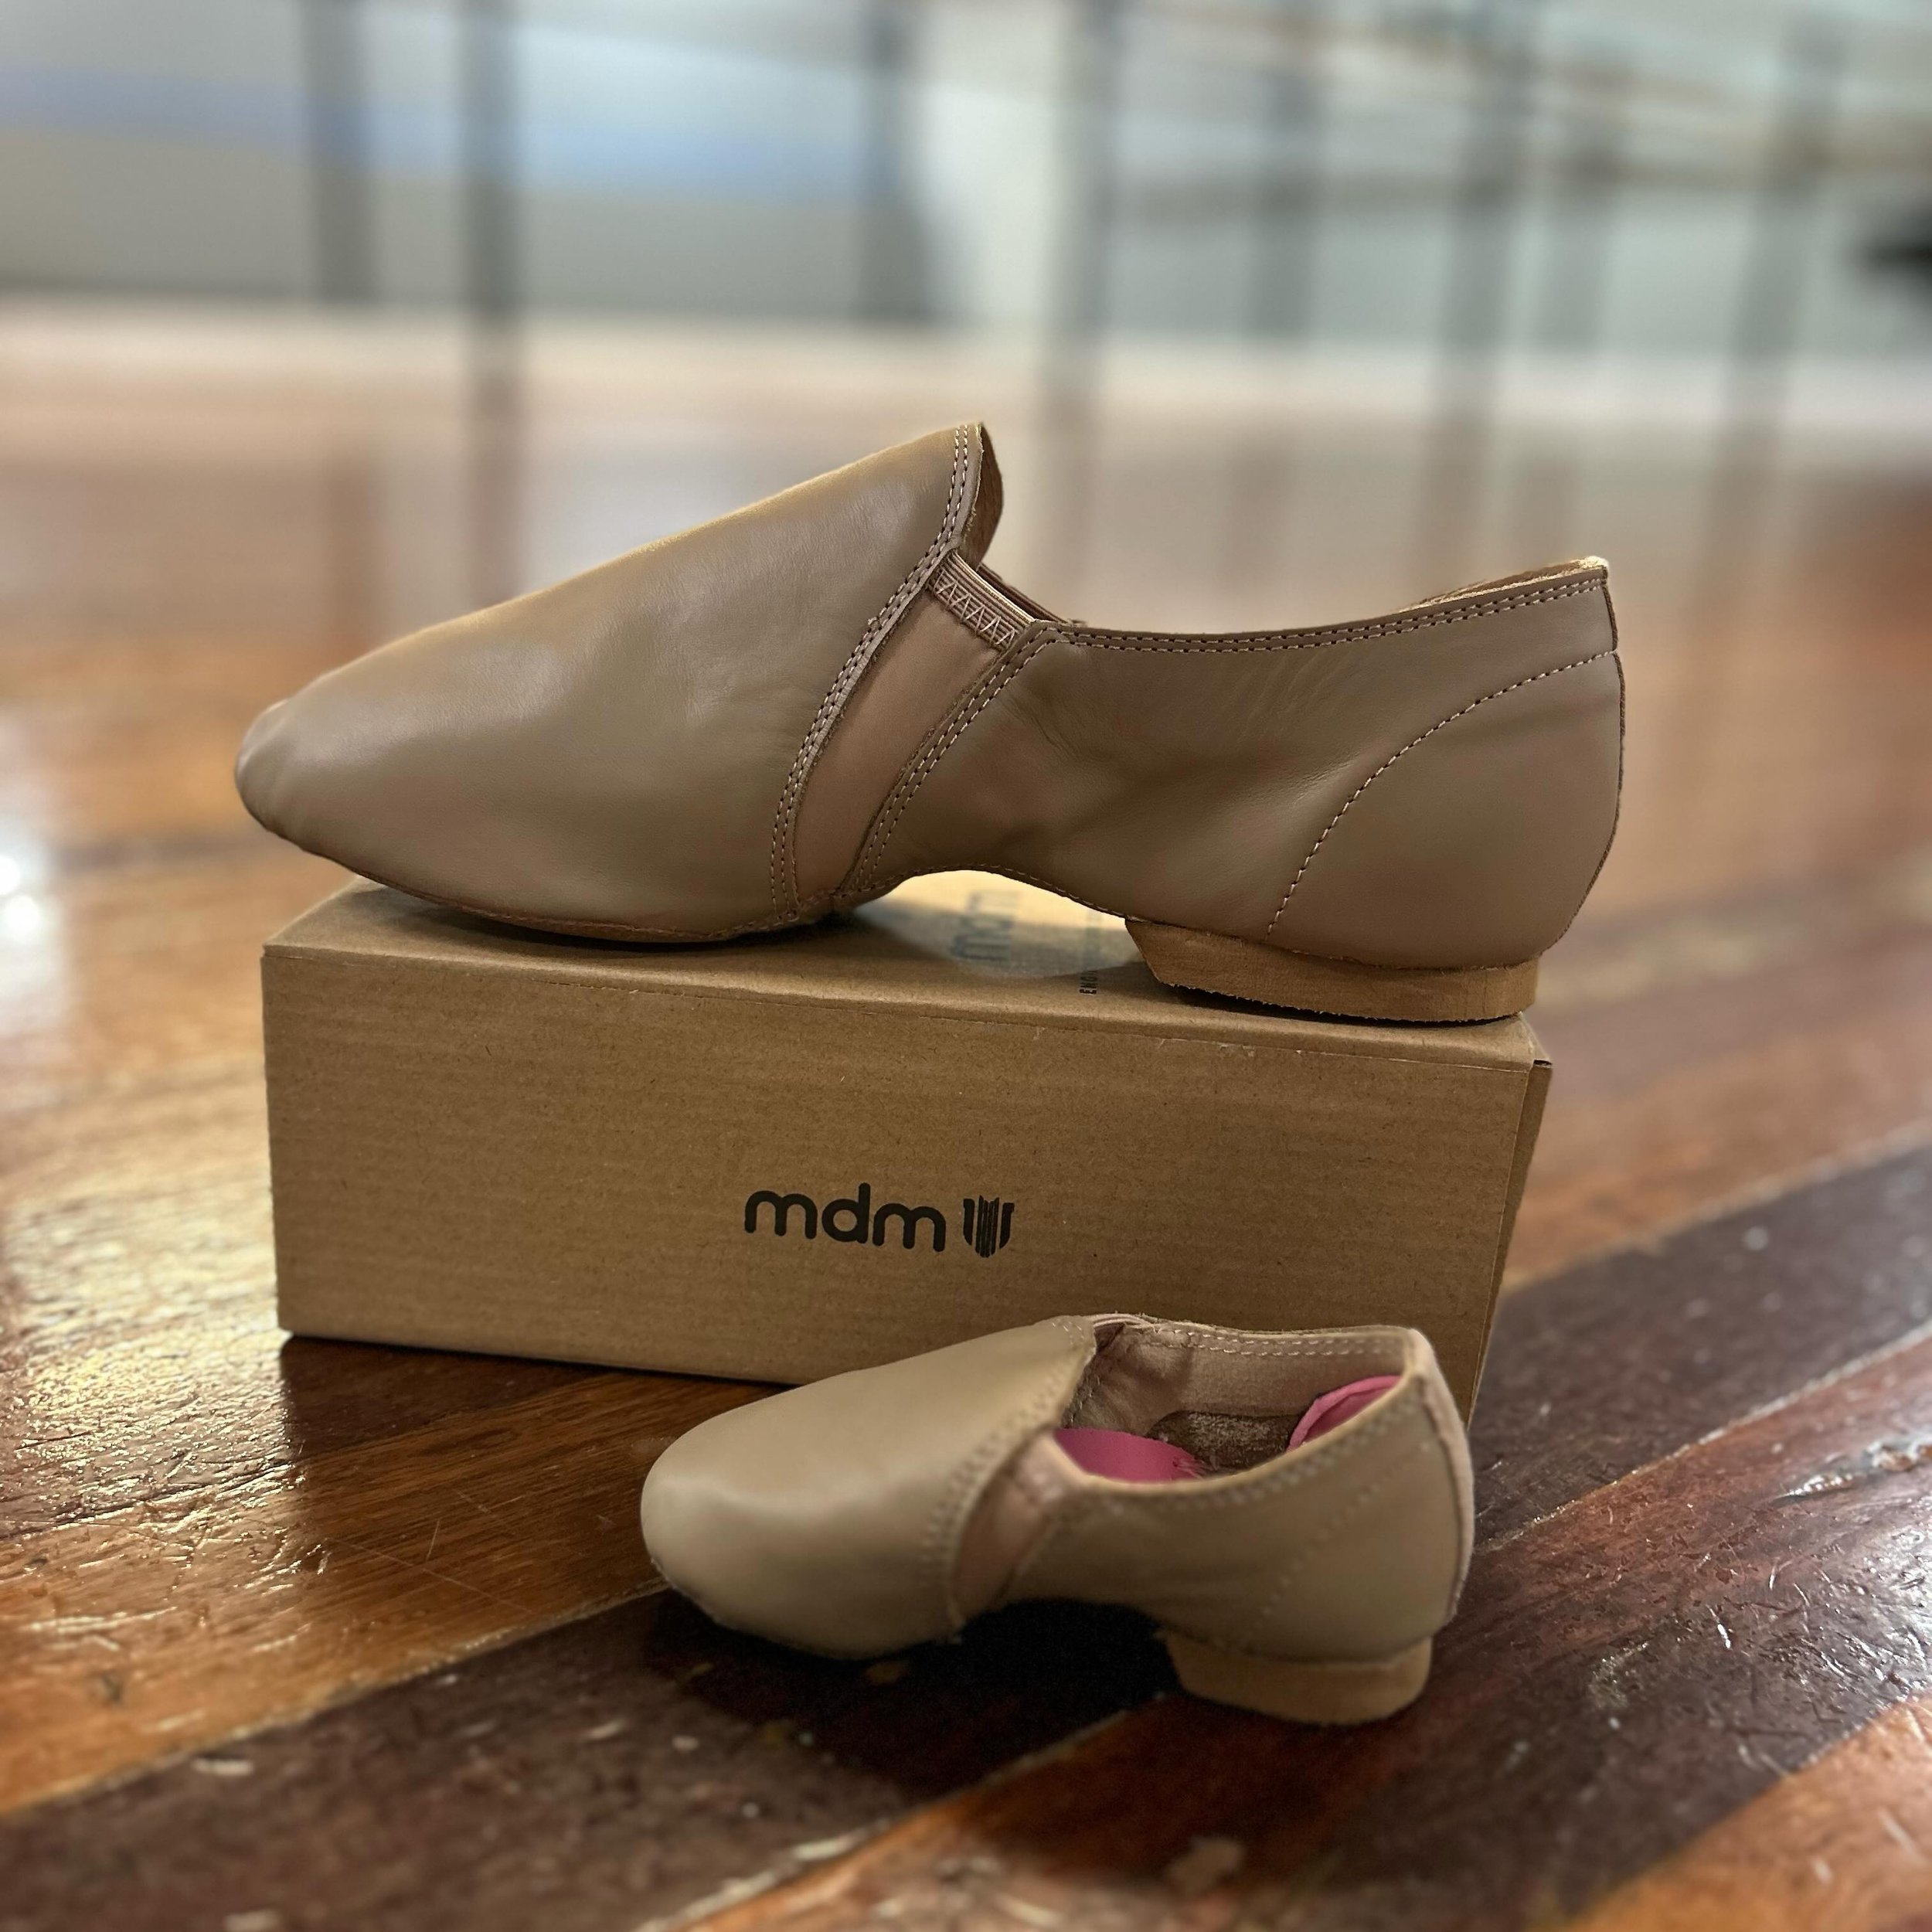 Here&rsquo;s the smallest and biggest MDM Jazz shoe we are currently stocking at the studio. The smallest Jazz shoe is sooo adorable 😍
Ballet shoes, Ballet tights and dance socks also available. See our friendly staff at reception for shoe fittings.